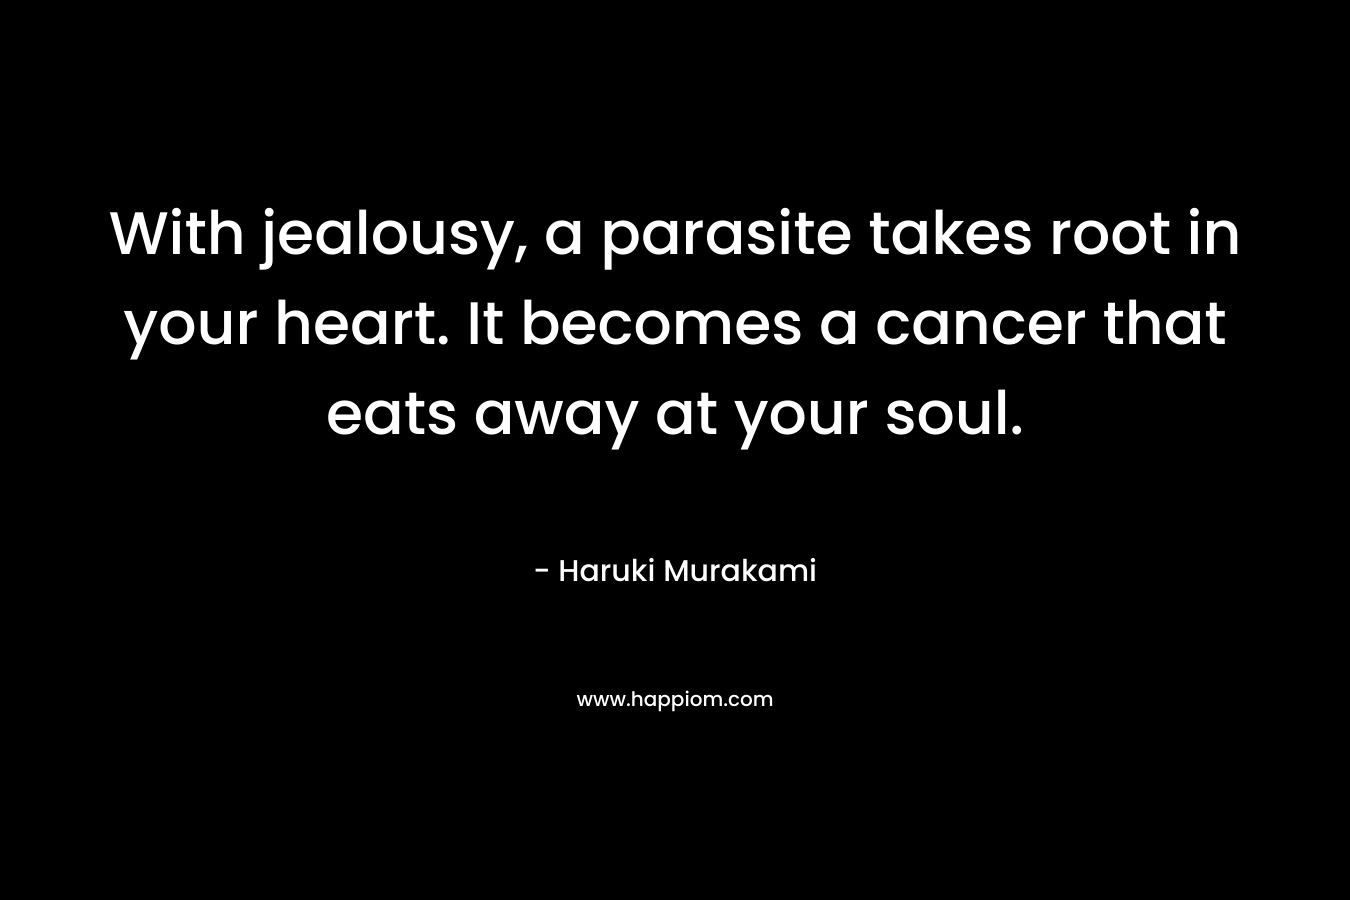 With jealousy, a parasite takes root in your heart. It becomes a cancer that eats away at your soul.